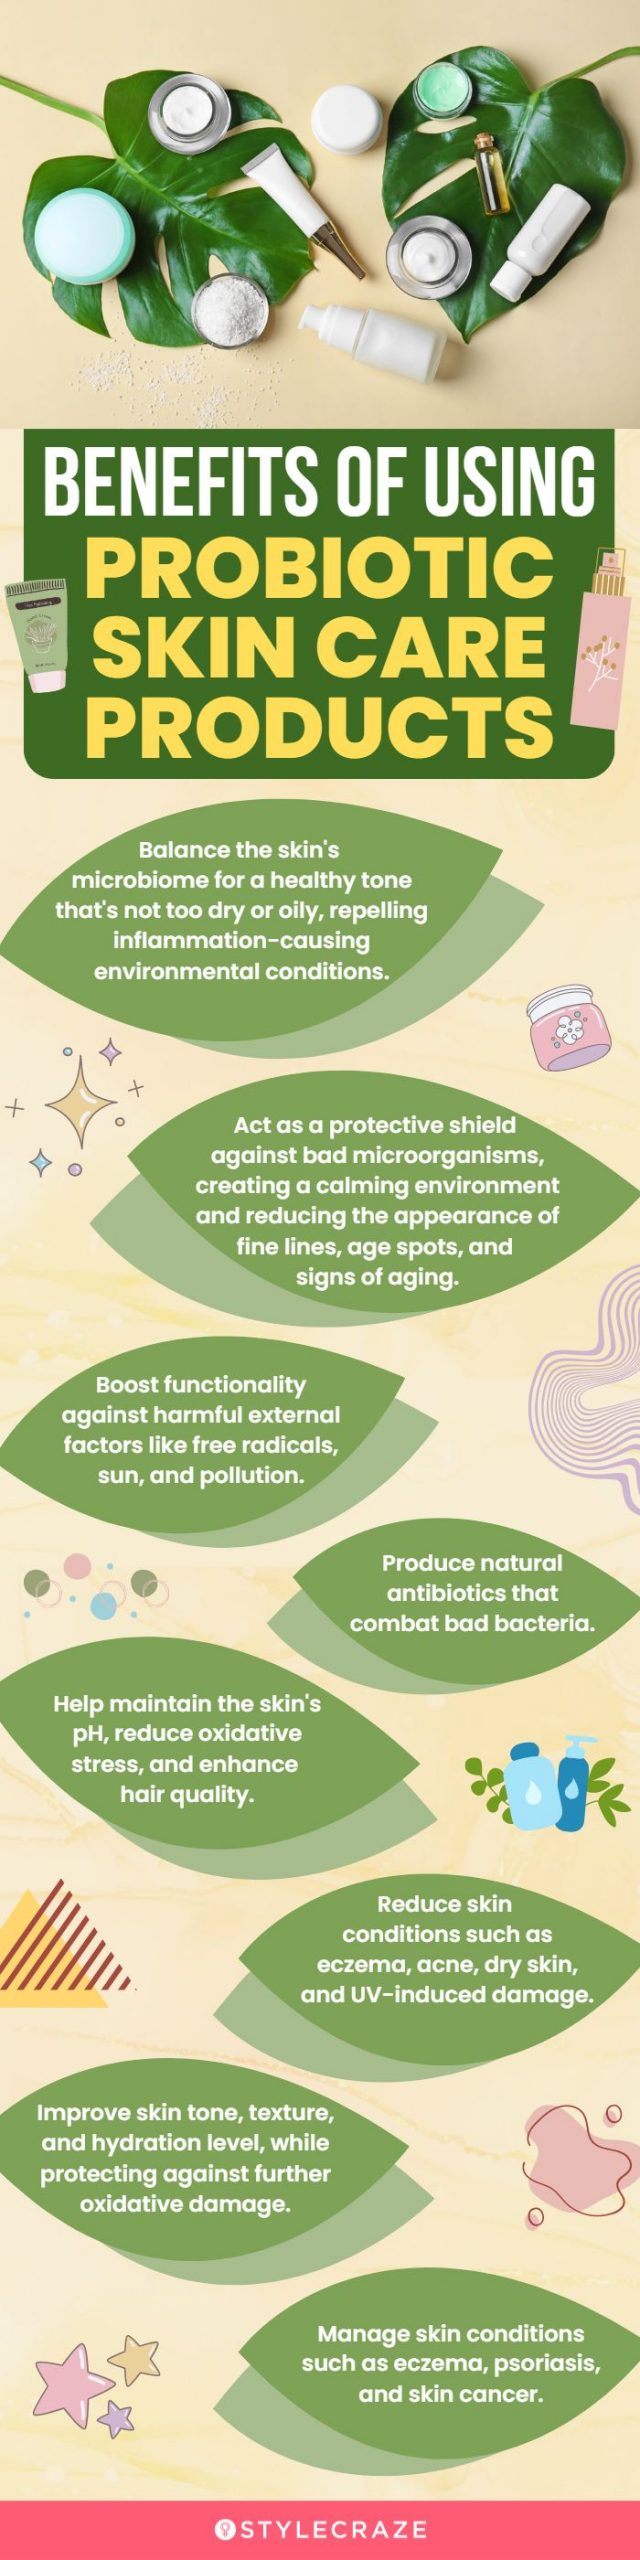 Benefits Of Using Probiotic Skin Care Products (infographic)